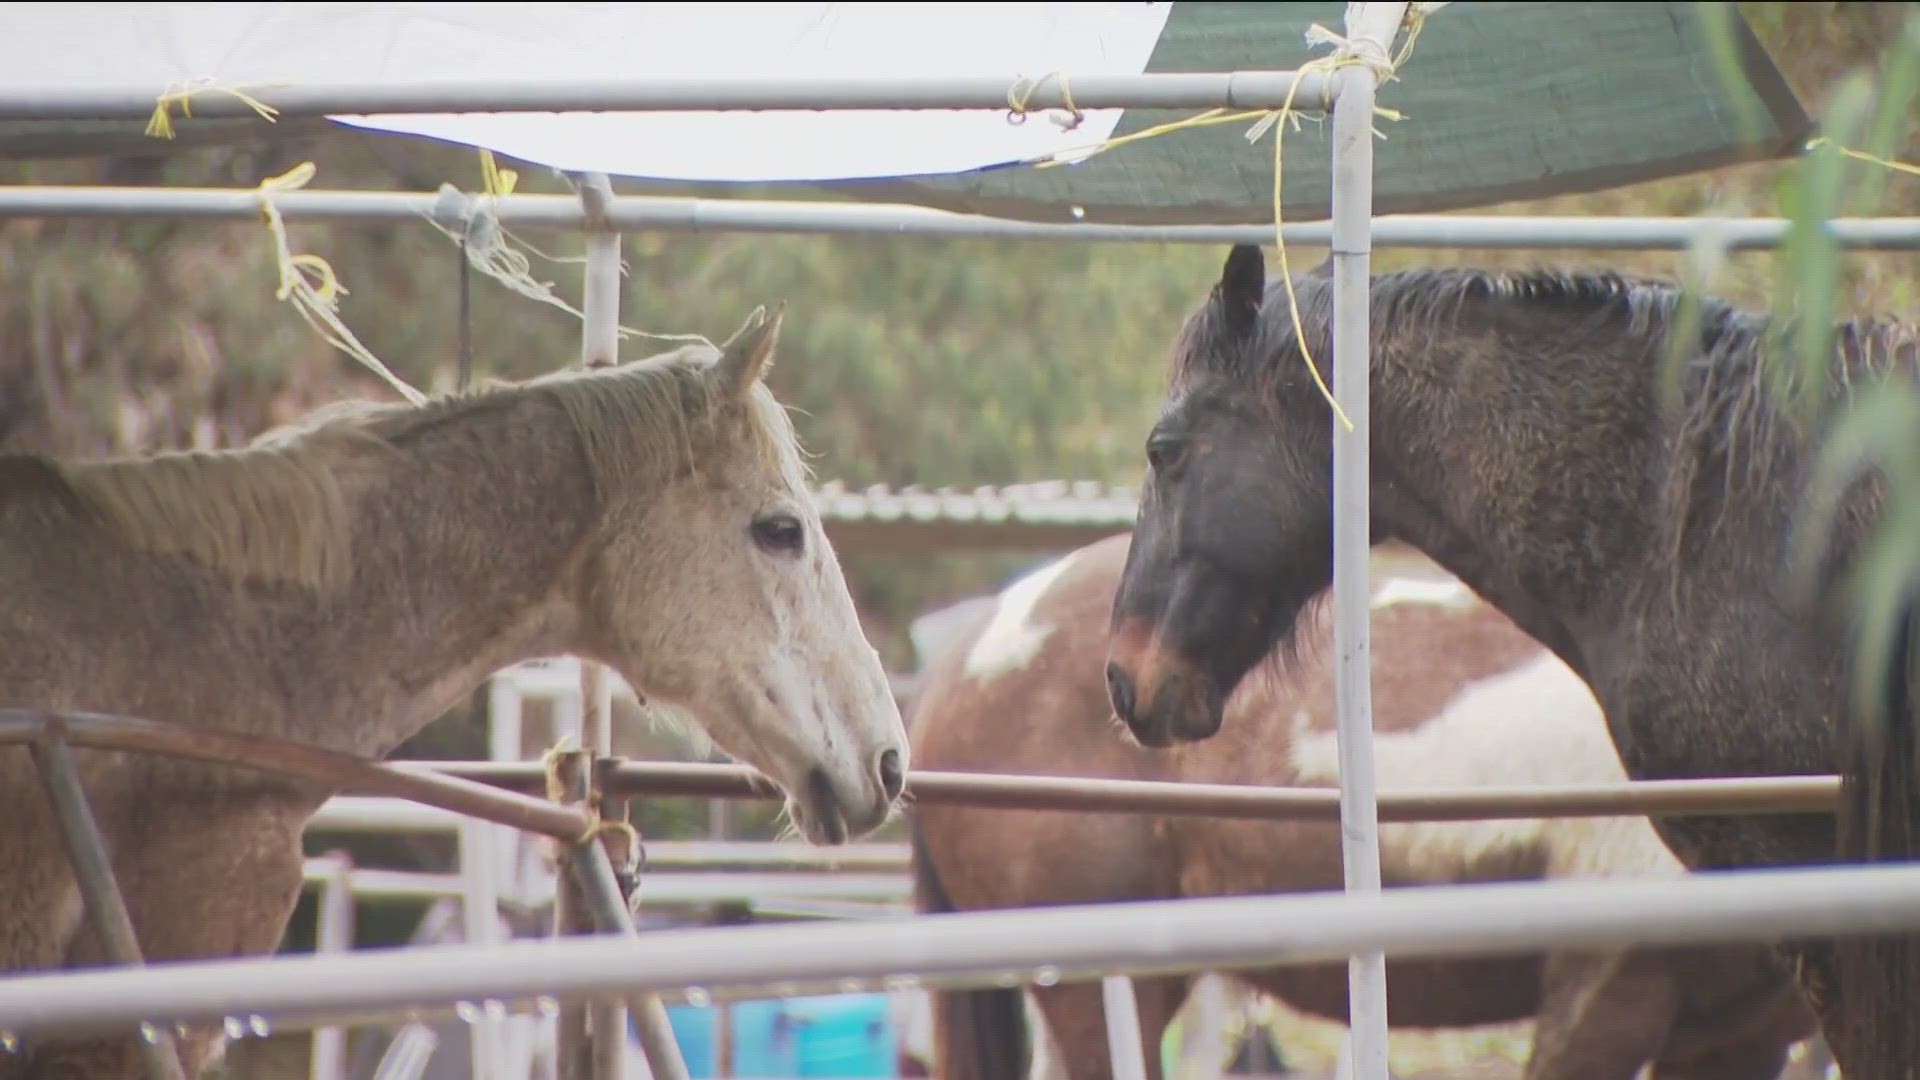 Neighbors expressed concerns about 15 horses on the property.